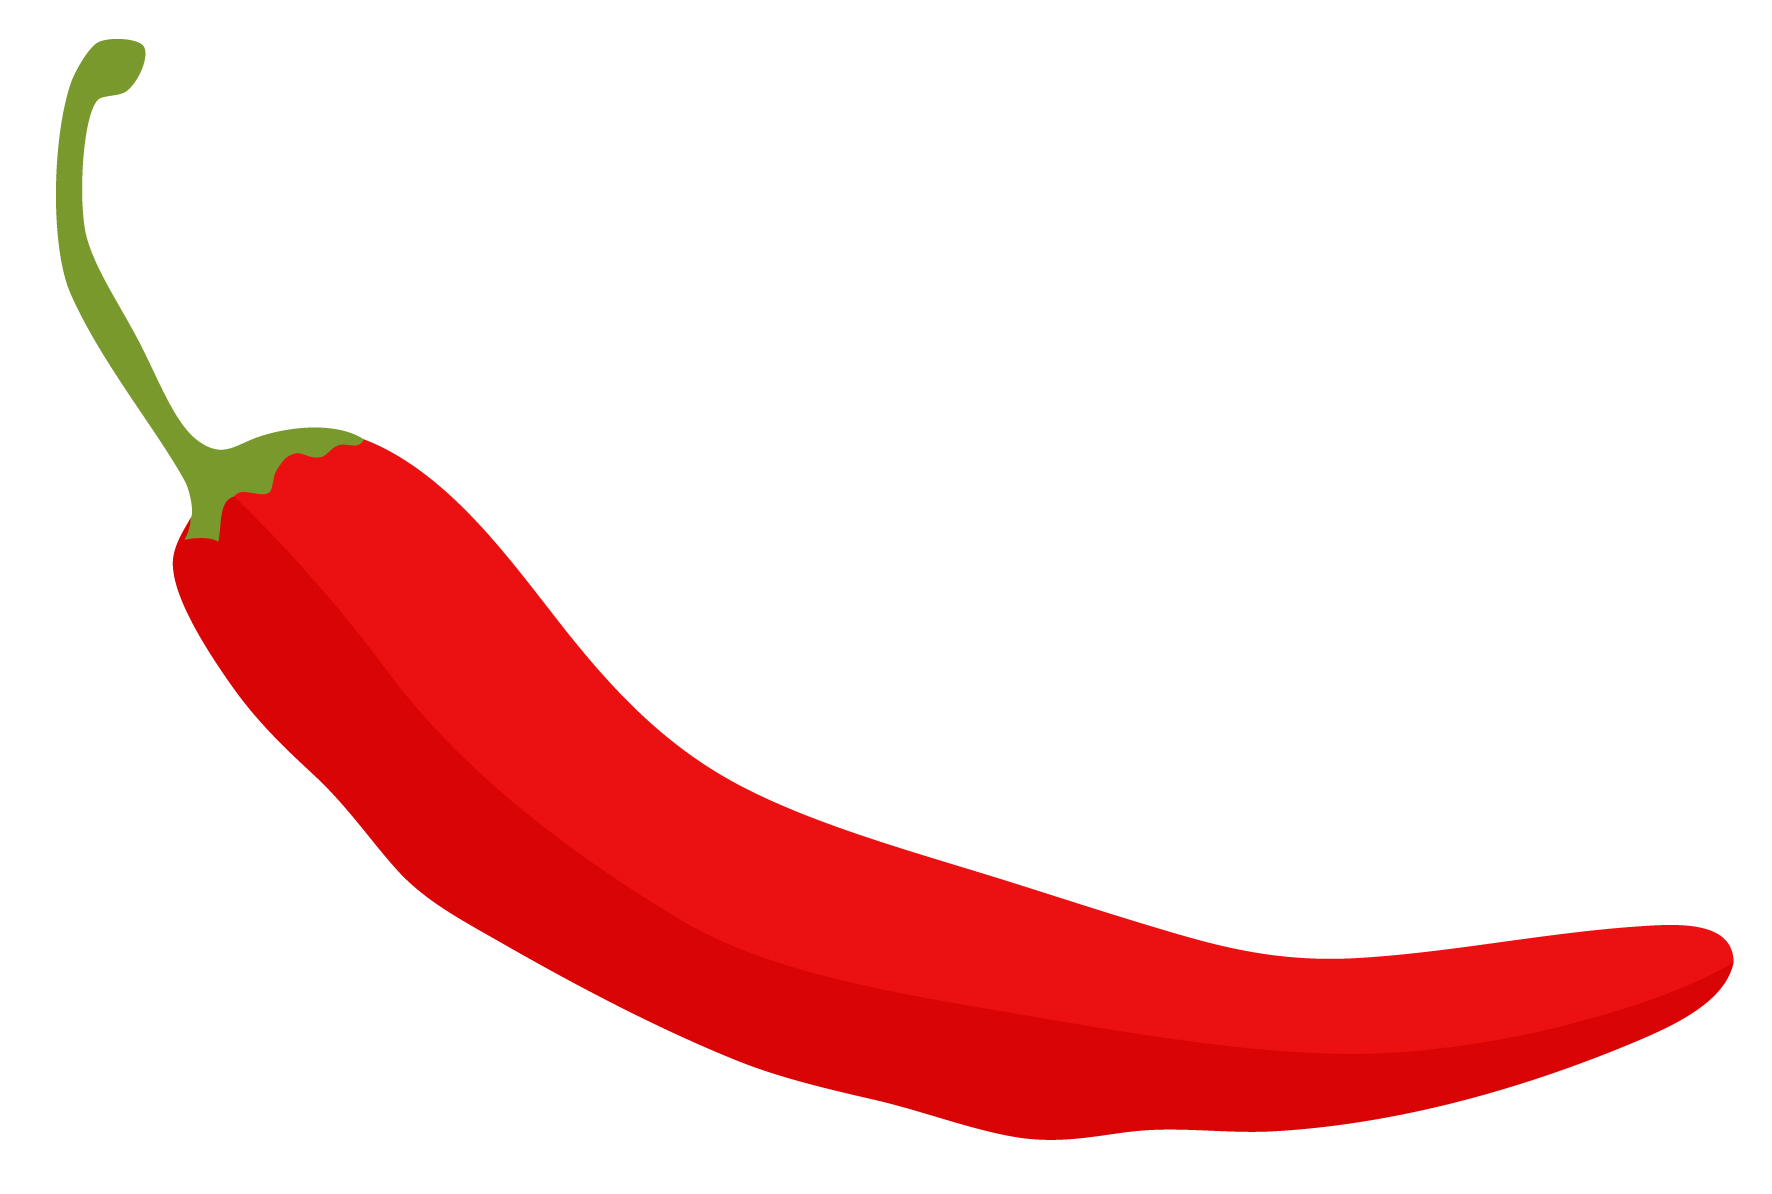 Chili Peppers Clip Art - Cliparts.co